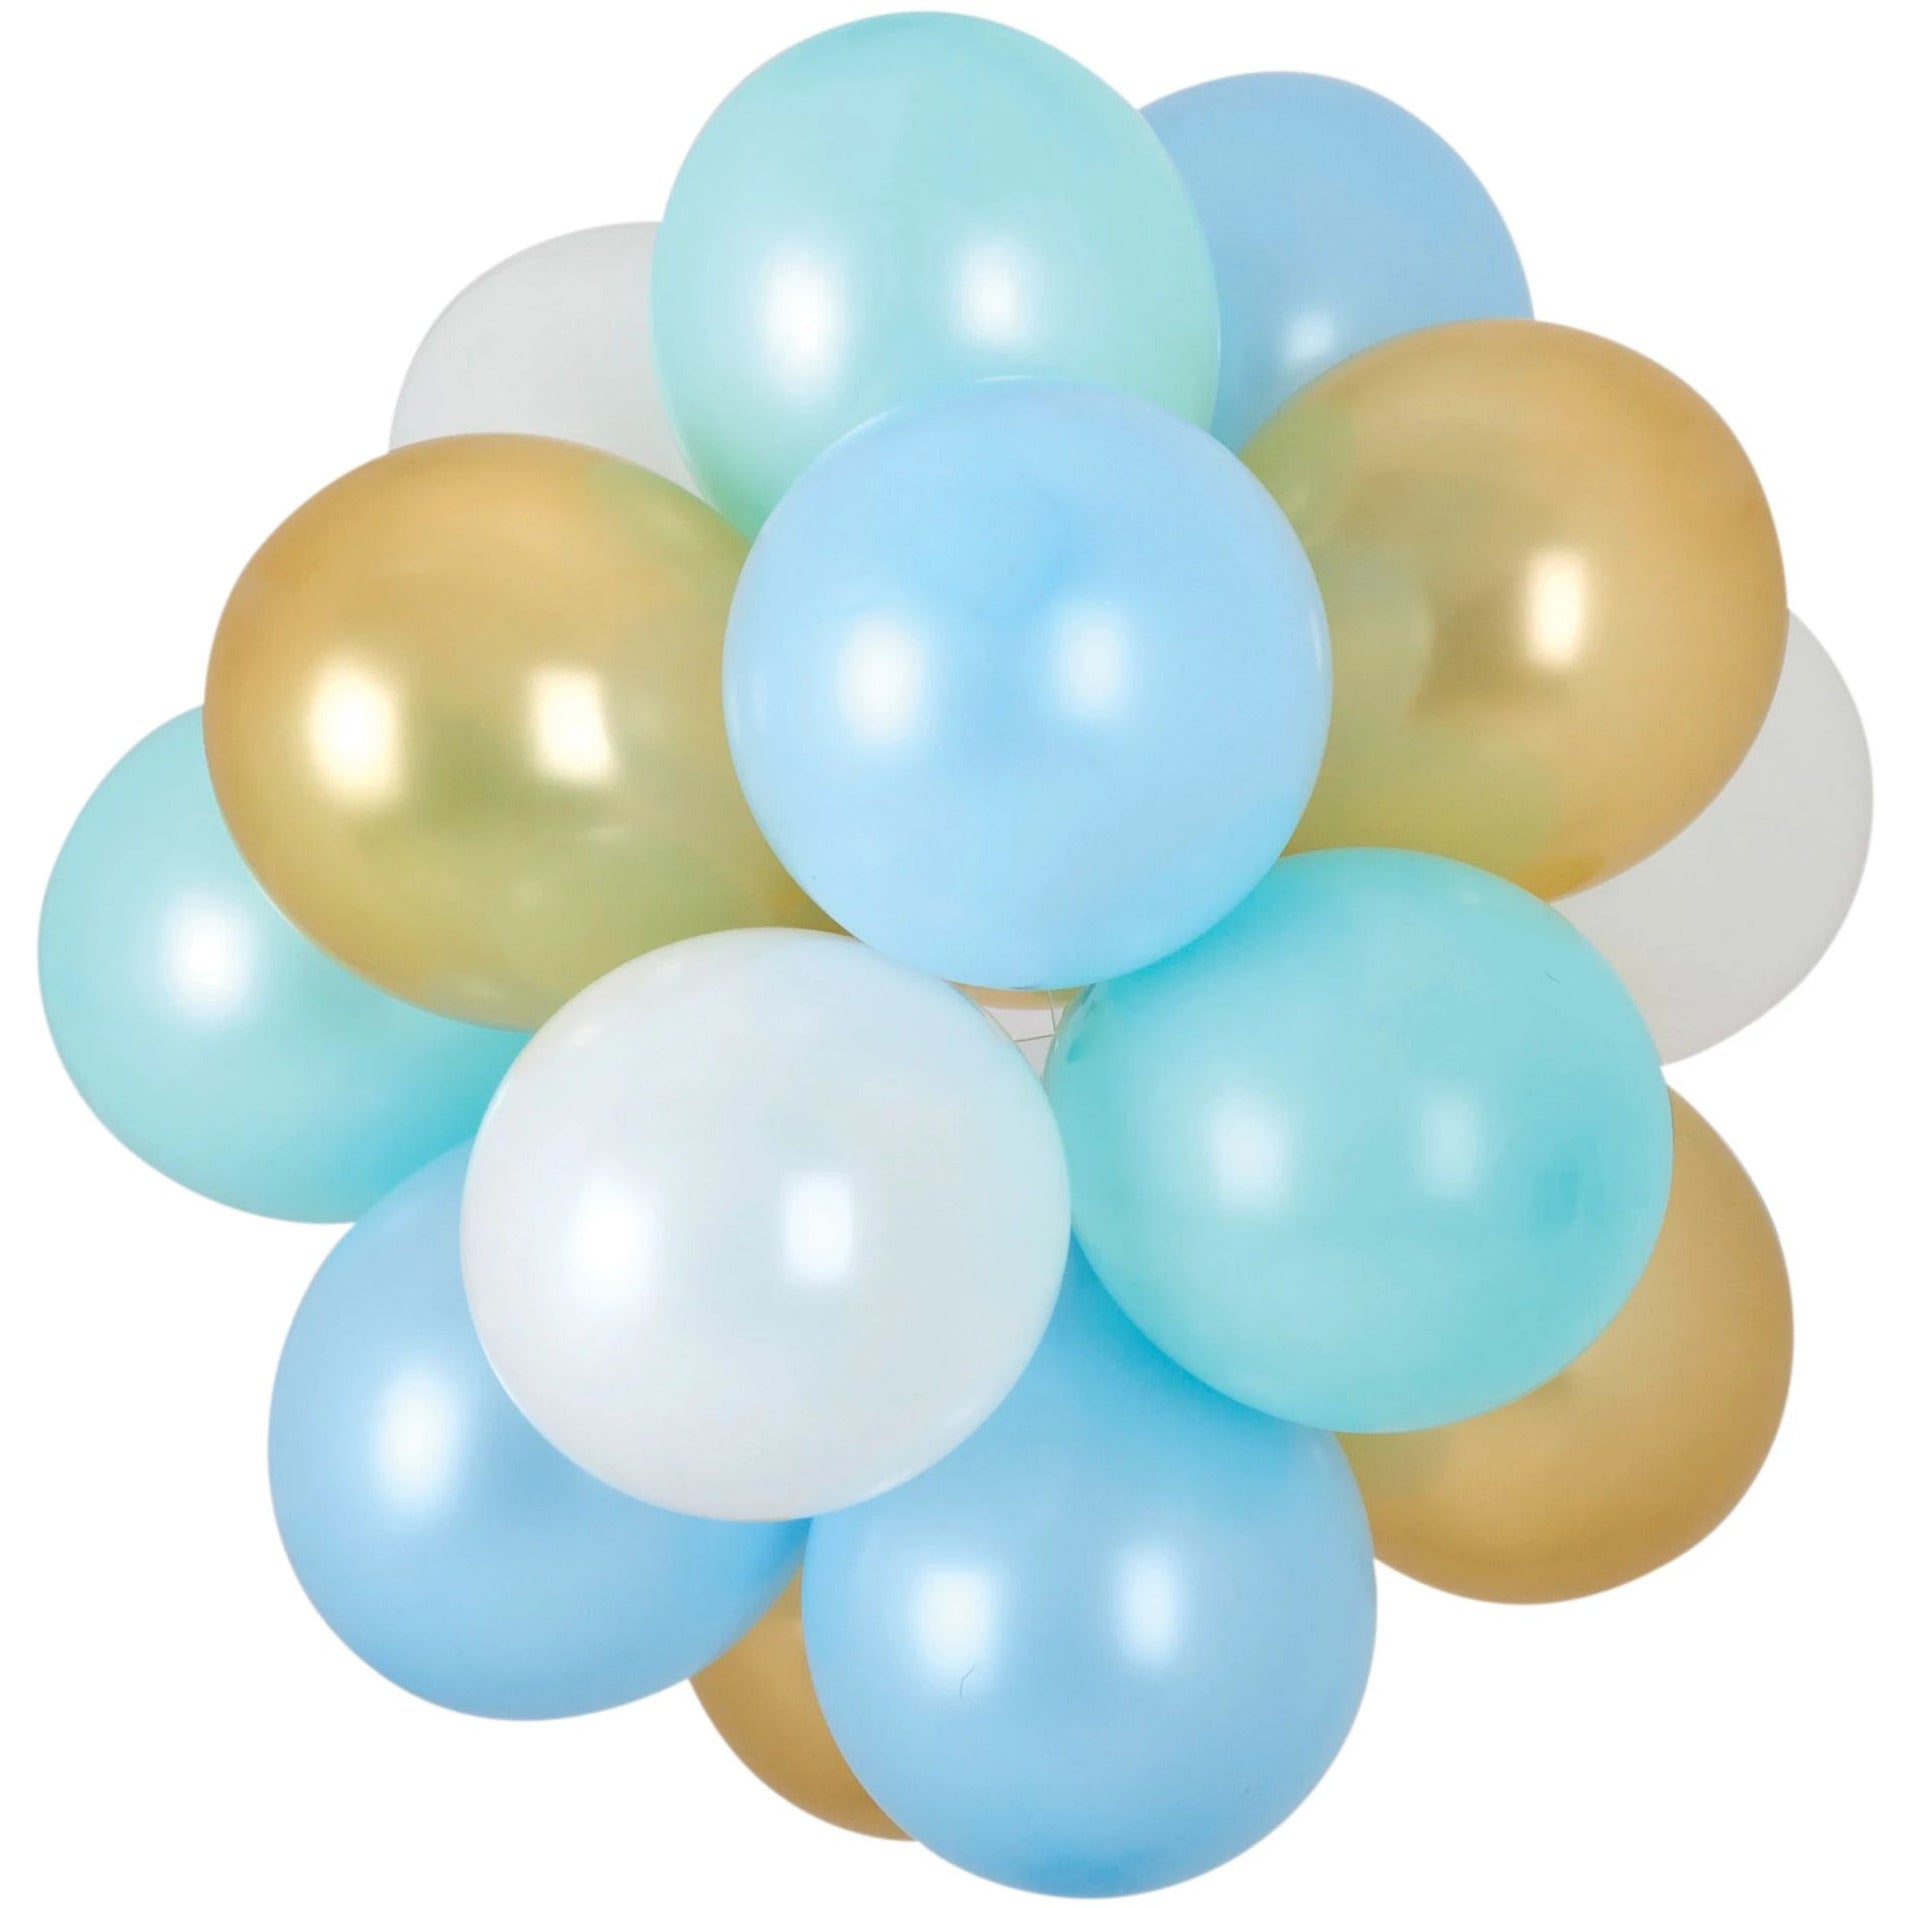 Amscan BALLOONS Air-Filled Latex Balloon Chandelier - Pastel Blue